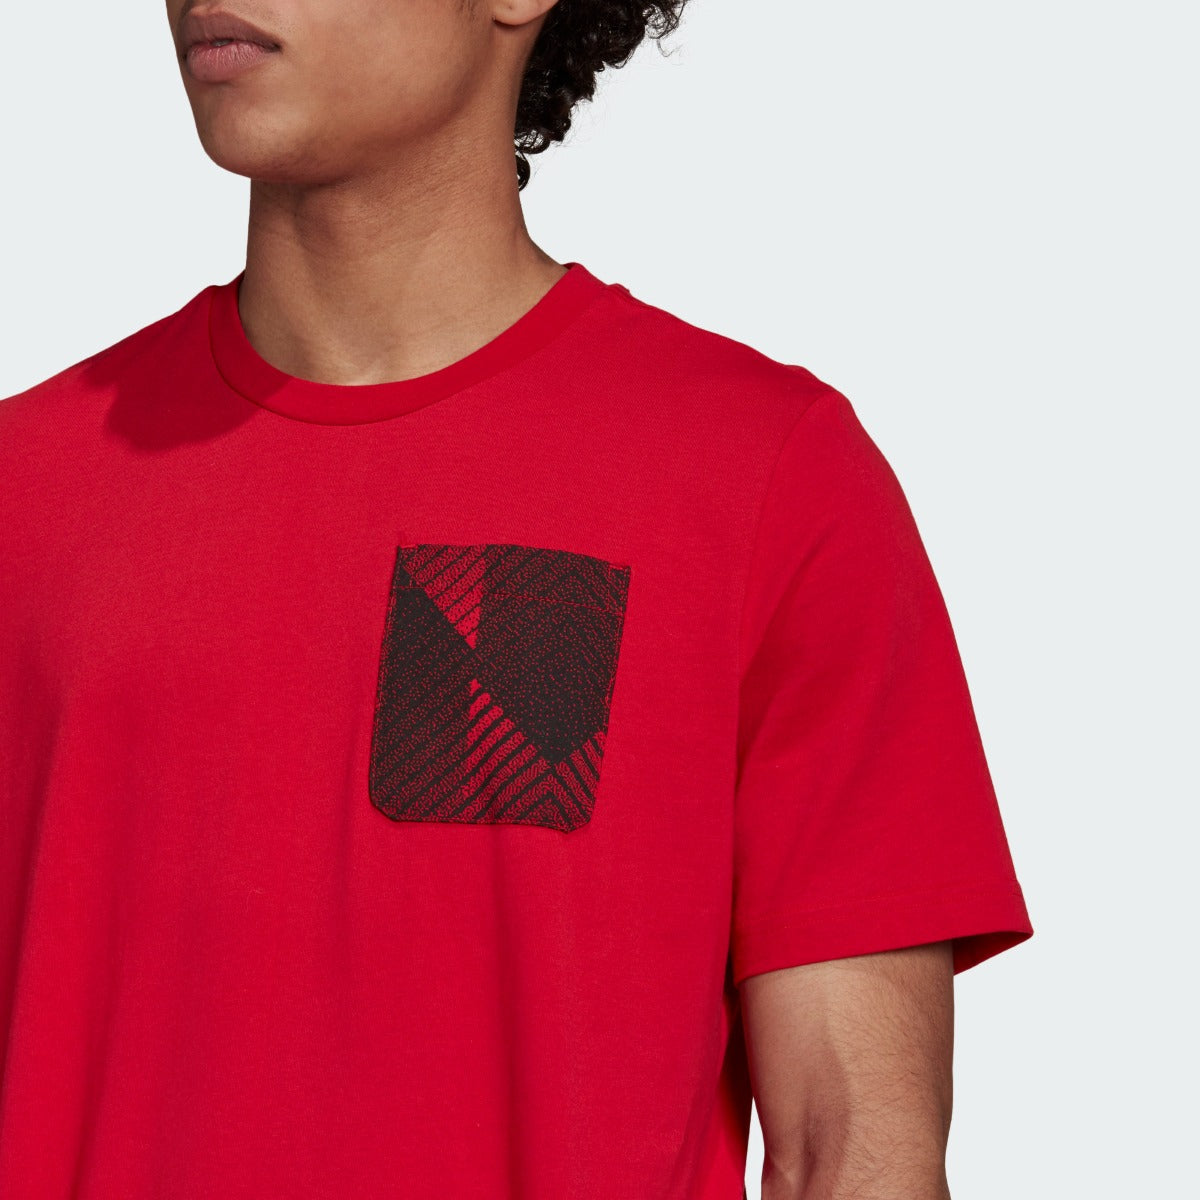 Adidas 2021-22 Manchester United Street Tee - Red (Detail 1)